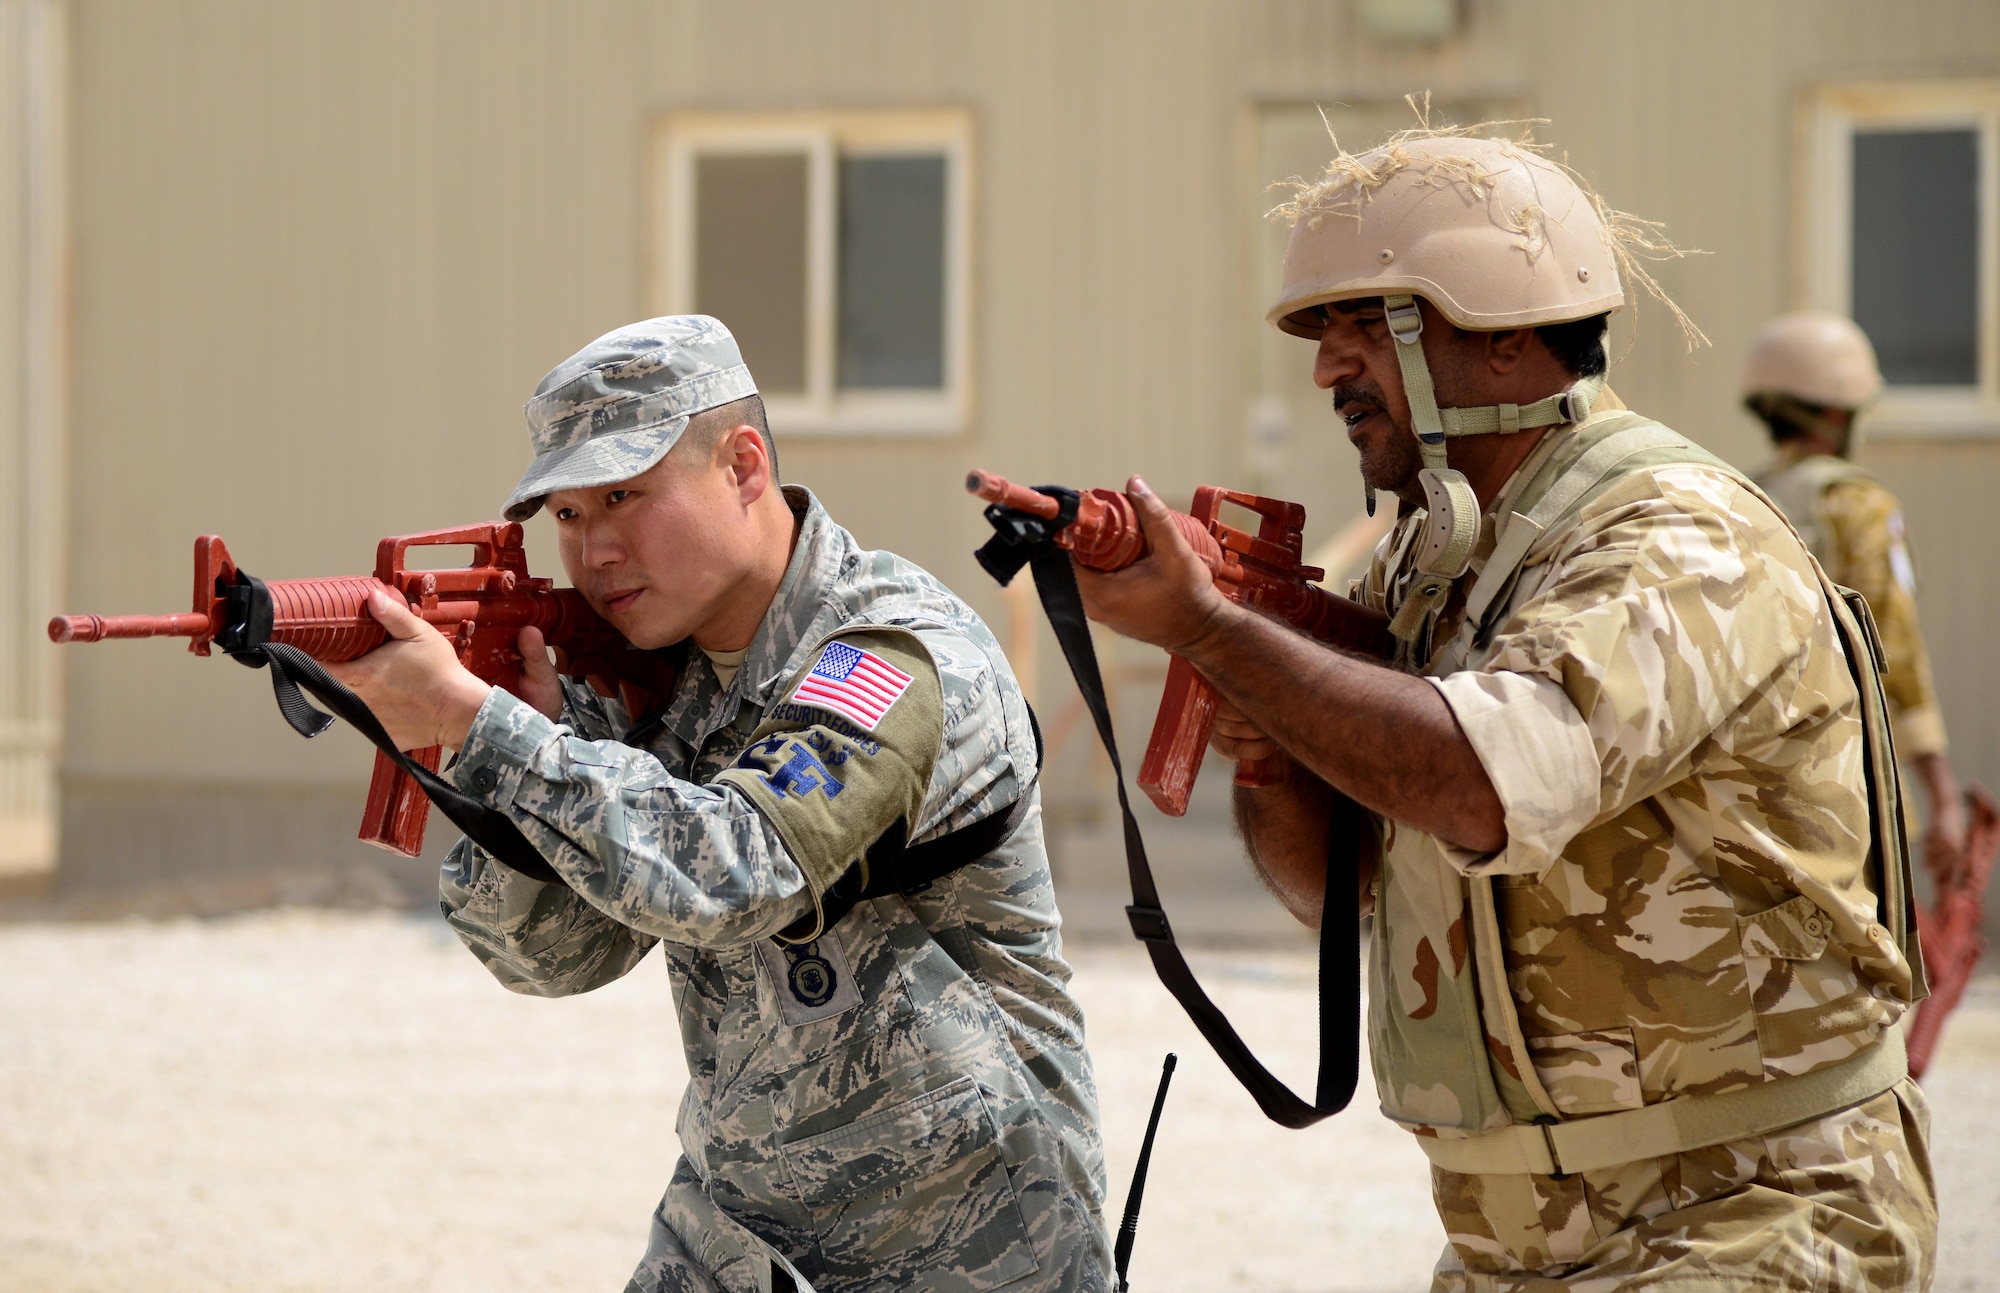 U.S. Air Force Staff Sgt. Jason Ventura, 379th Expeditionary Security Forces Squadron Check Six facilitator, demonstrates proper weapon holding procedures during joint interoperability training April 14, 2015, at Al Udeid Air Base, Qatar. Airmen from the 379th ESFS shared techniques and procedures with members of the Qatar Emiri Air Force during this joint training. Training like this enhances the interoperability of both the U.S. and its host nation partners and helps improve bilateral relations by sharing techniques on how each country operates. (U.S. Air Force photo by Senior Airman Kia Atkins)